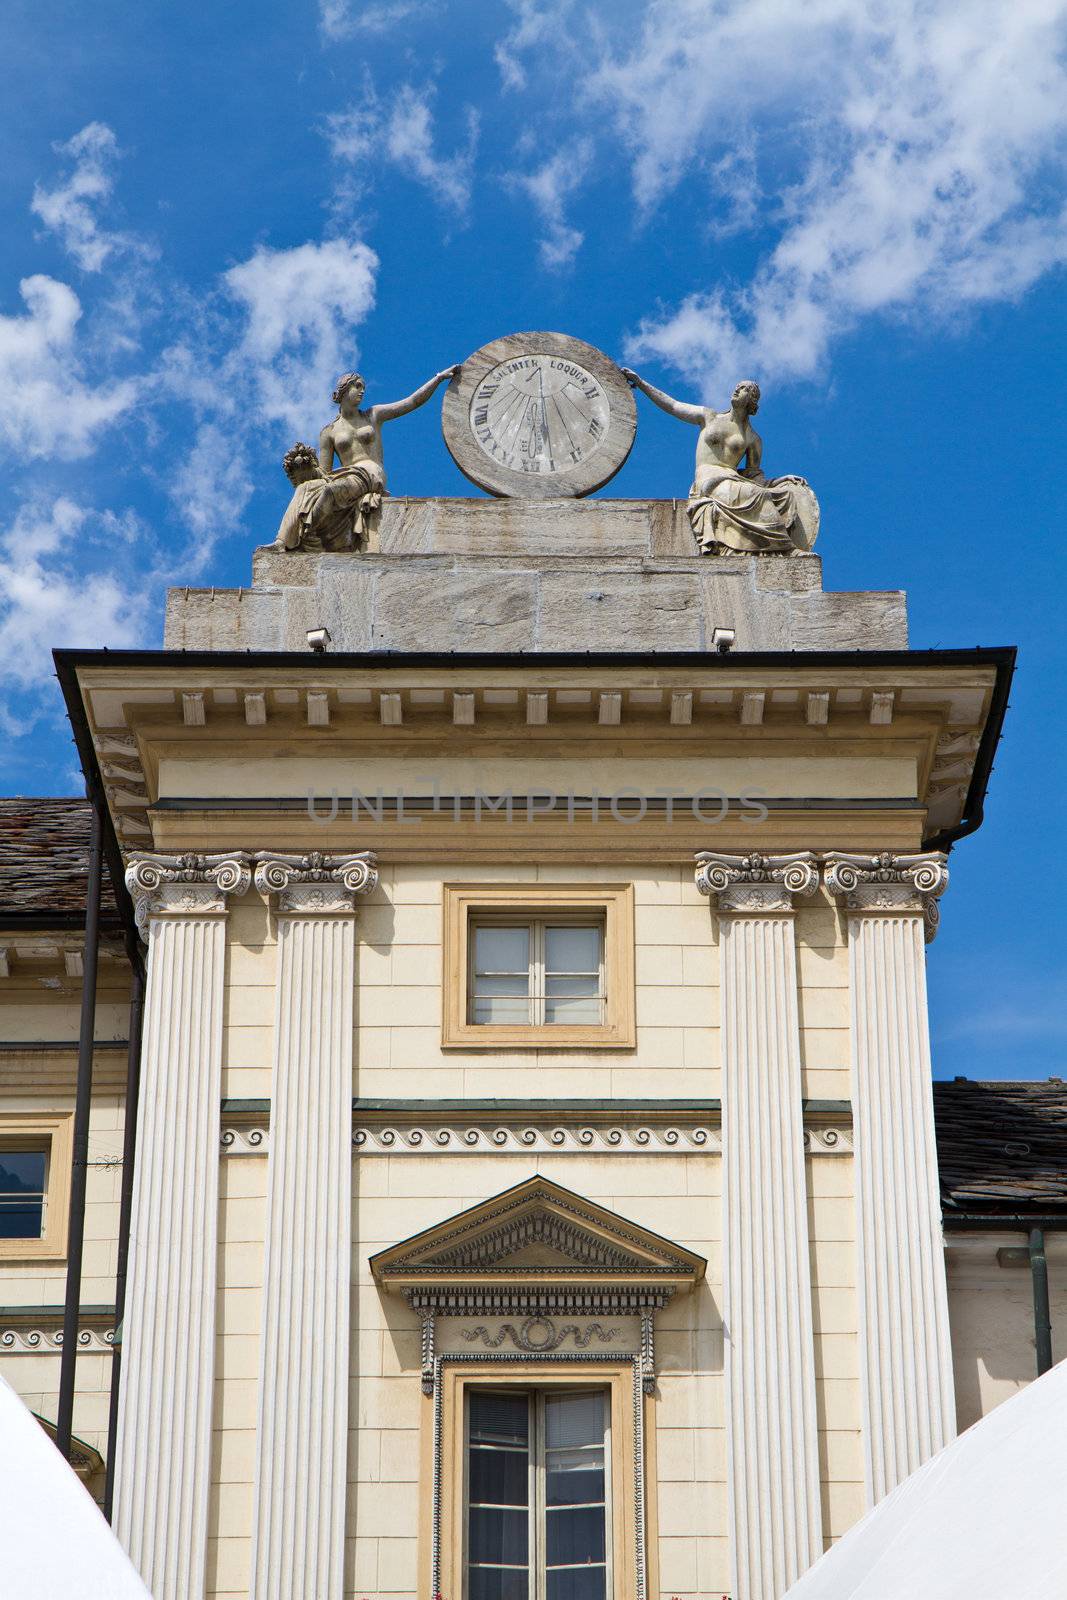 Town hall of Aosta in Italy.